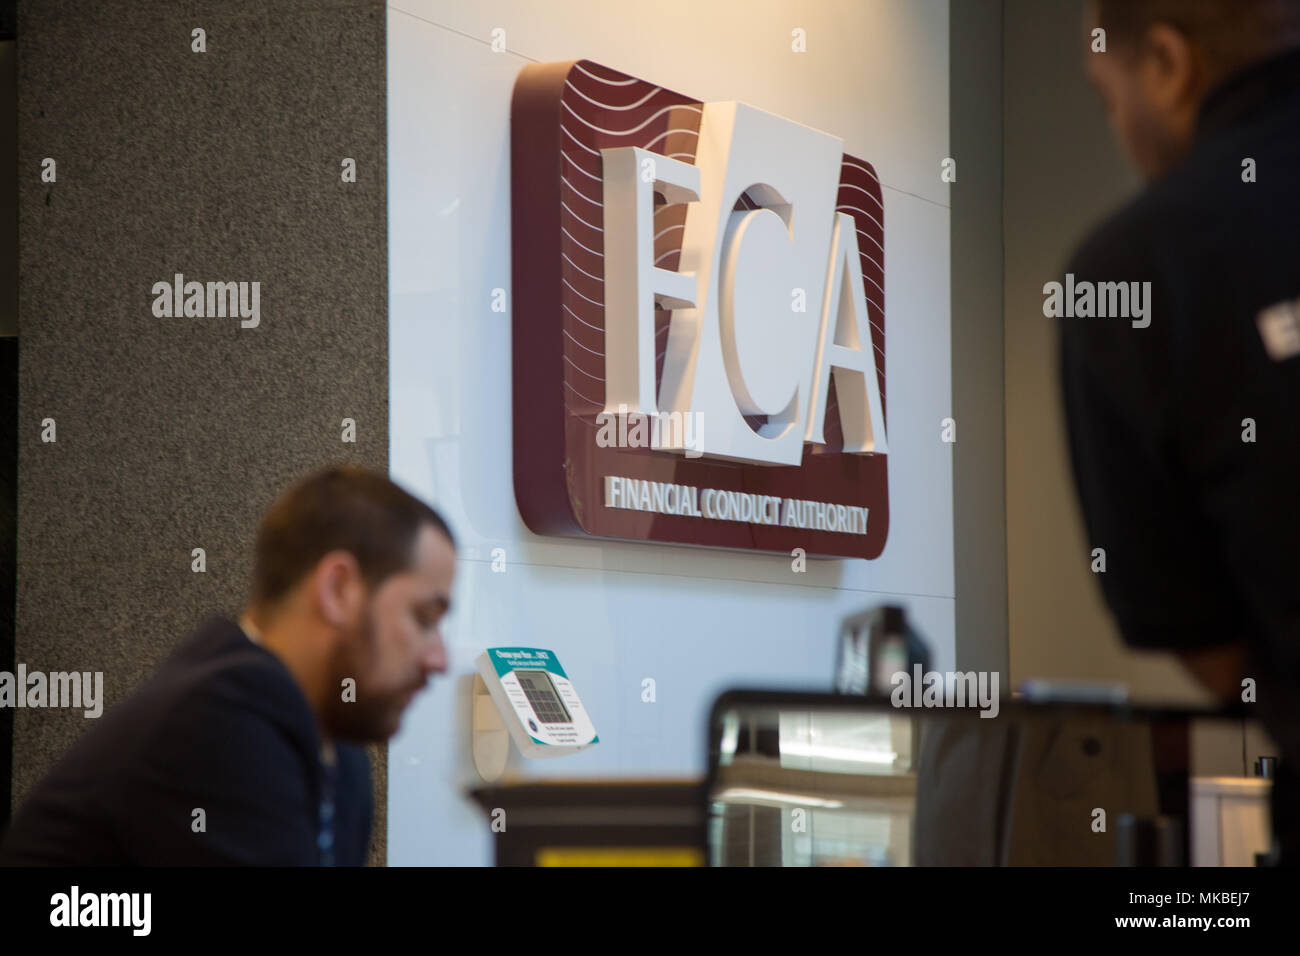 Financial Conduct Authority (FCA) offices, North Colonnade, Docklands, London Stock Photo